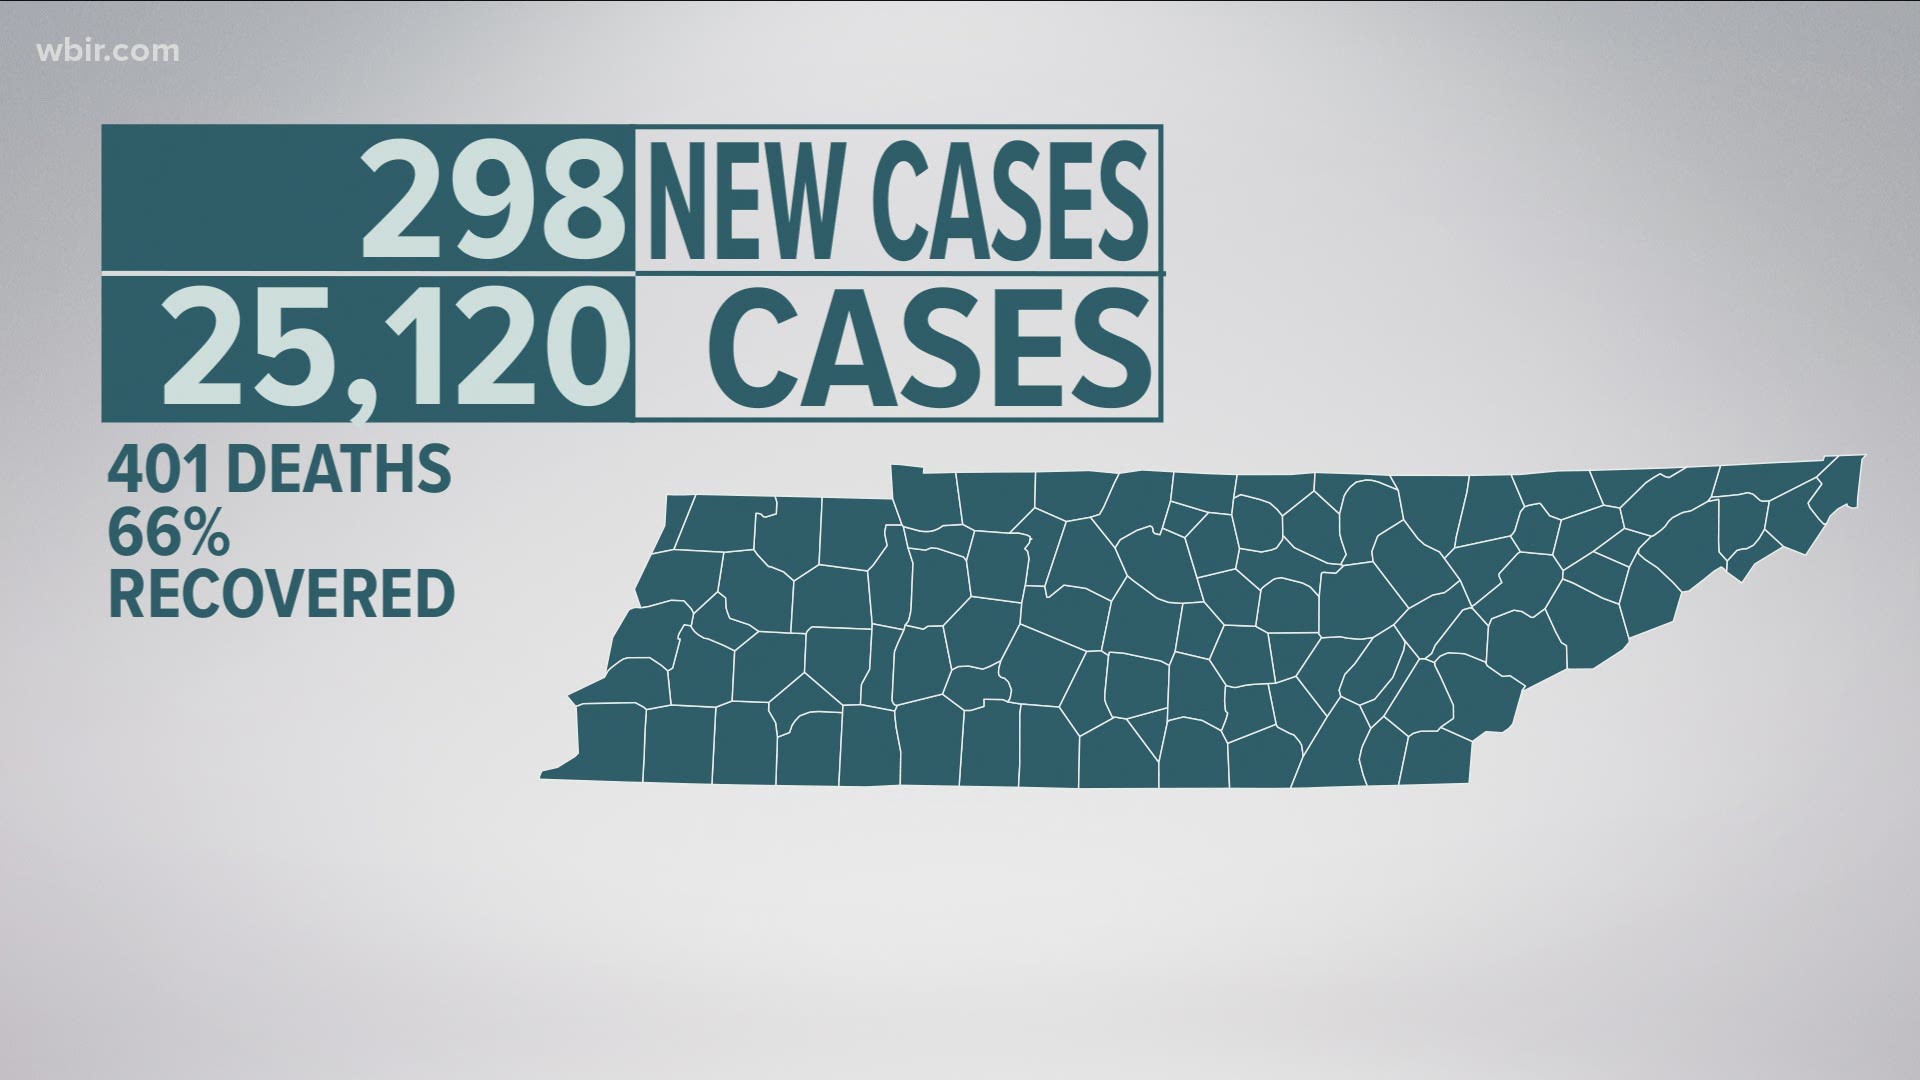 Across Tennessee, there are 298 new cases of COVID-19.